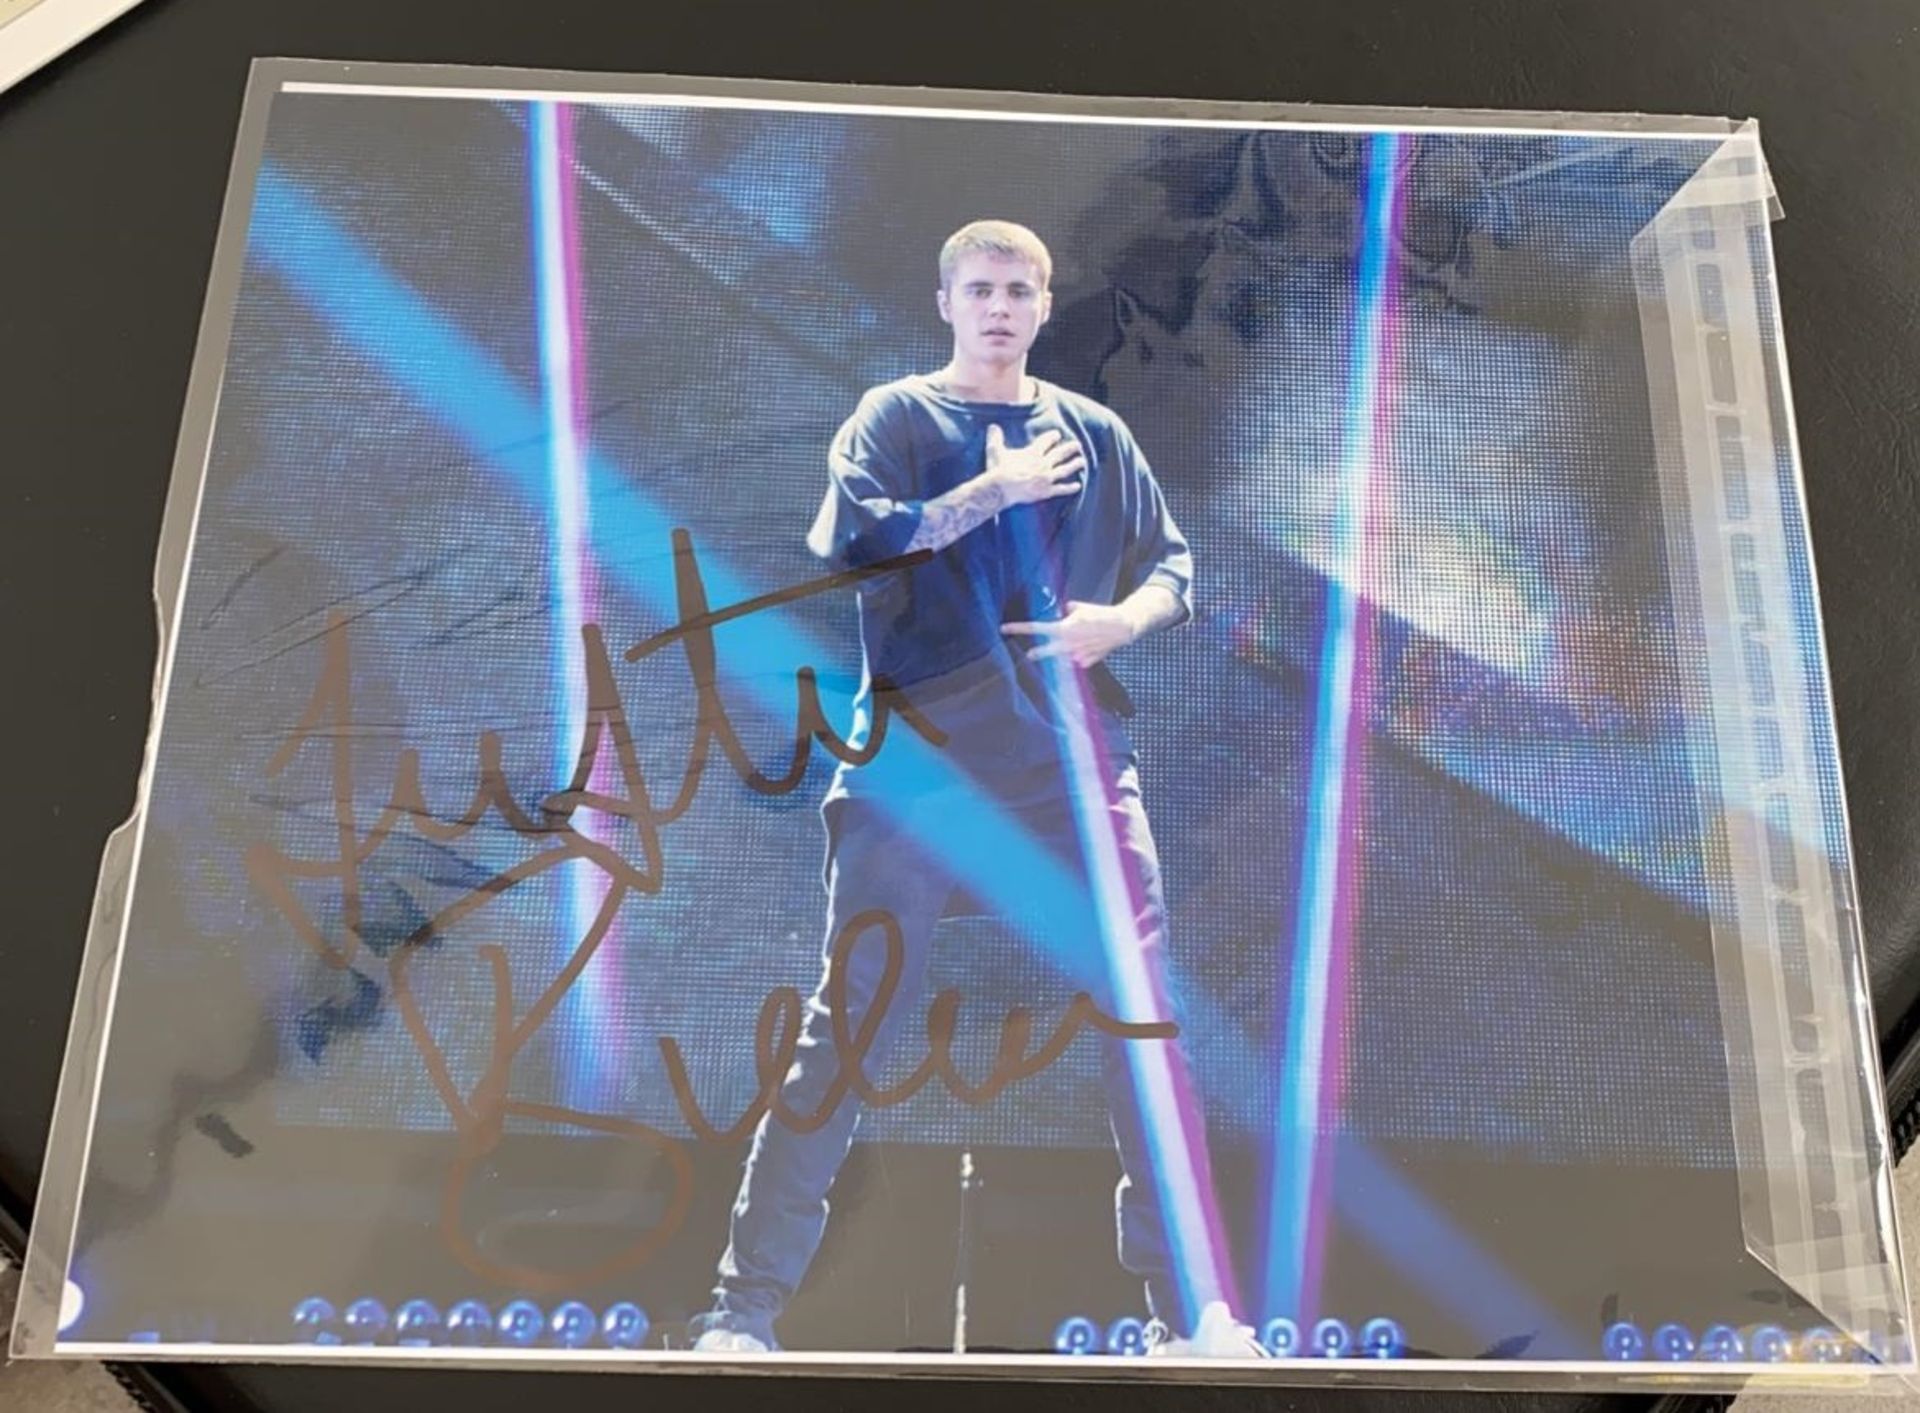 1 x Signed Autograph Picture - JUSTIN BIEBER - With COA - Size 12 x 8 Inch - NO VAT ON THE HAMMER - Image 2 of 3